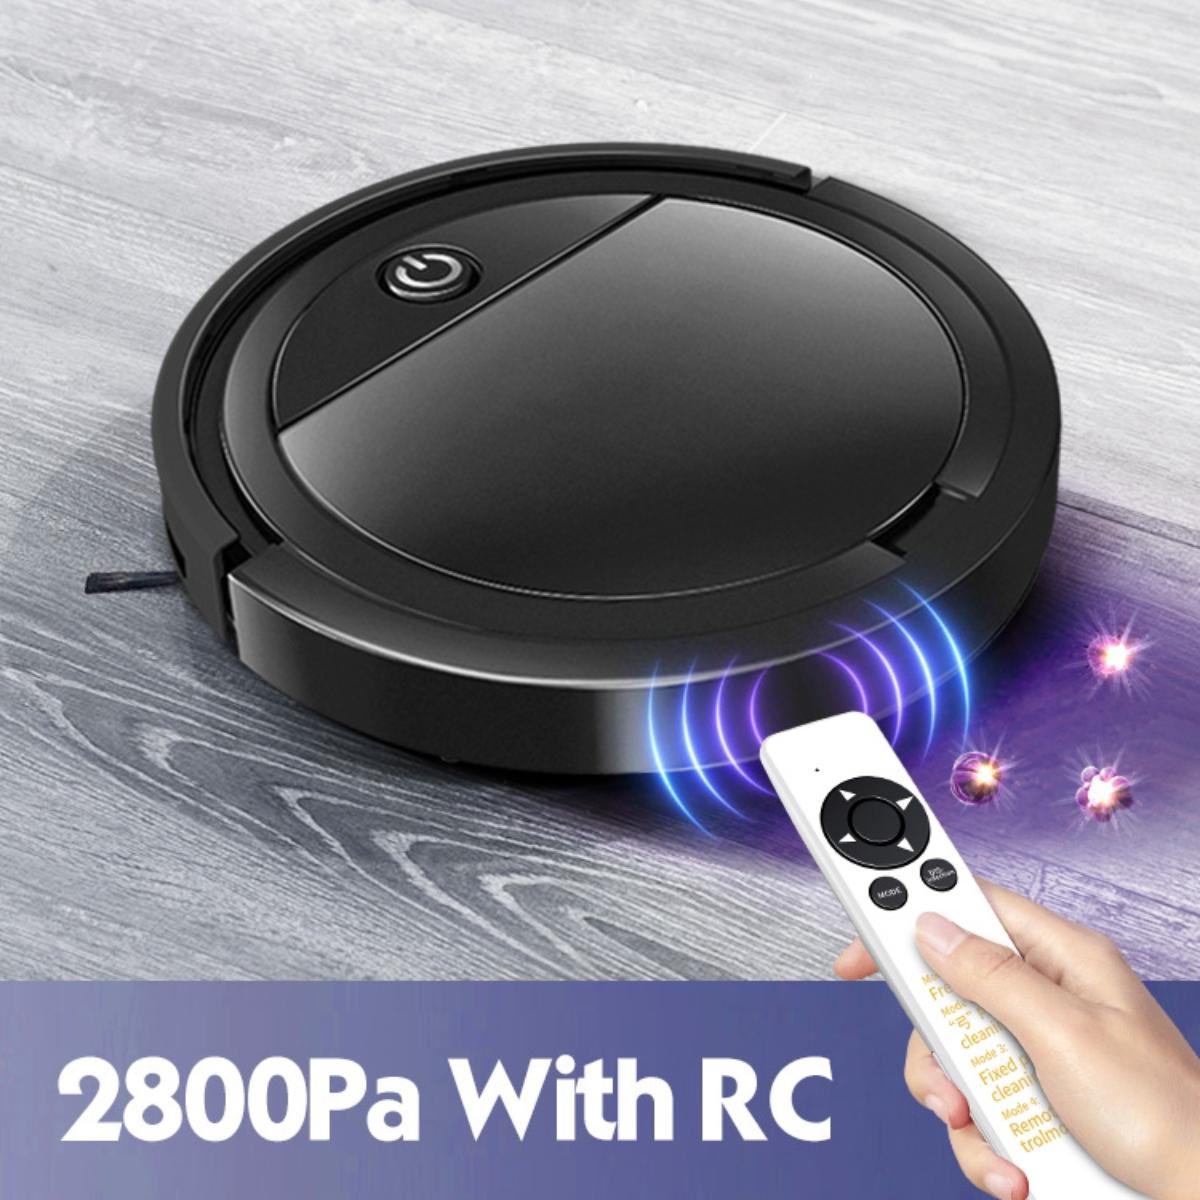 A MIJIA Home Wet And Dry Home Appliance Smart Floor Cleaning Robot Vacuum Cleaner And Water Robotic Mop Sweep Mop Vacuum